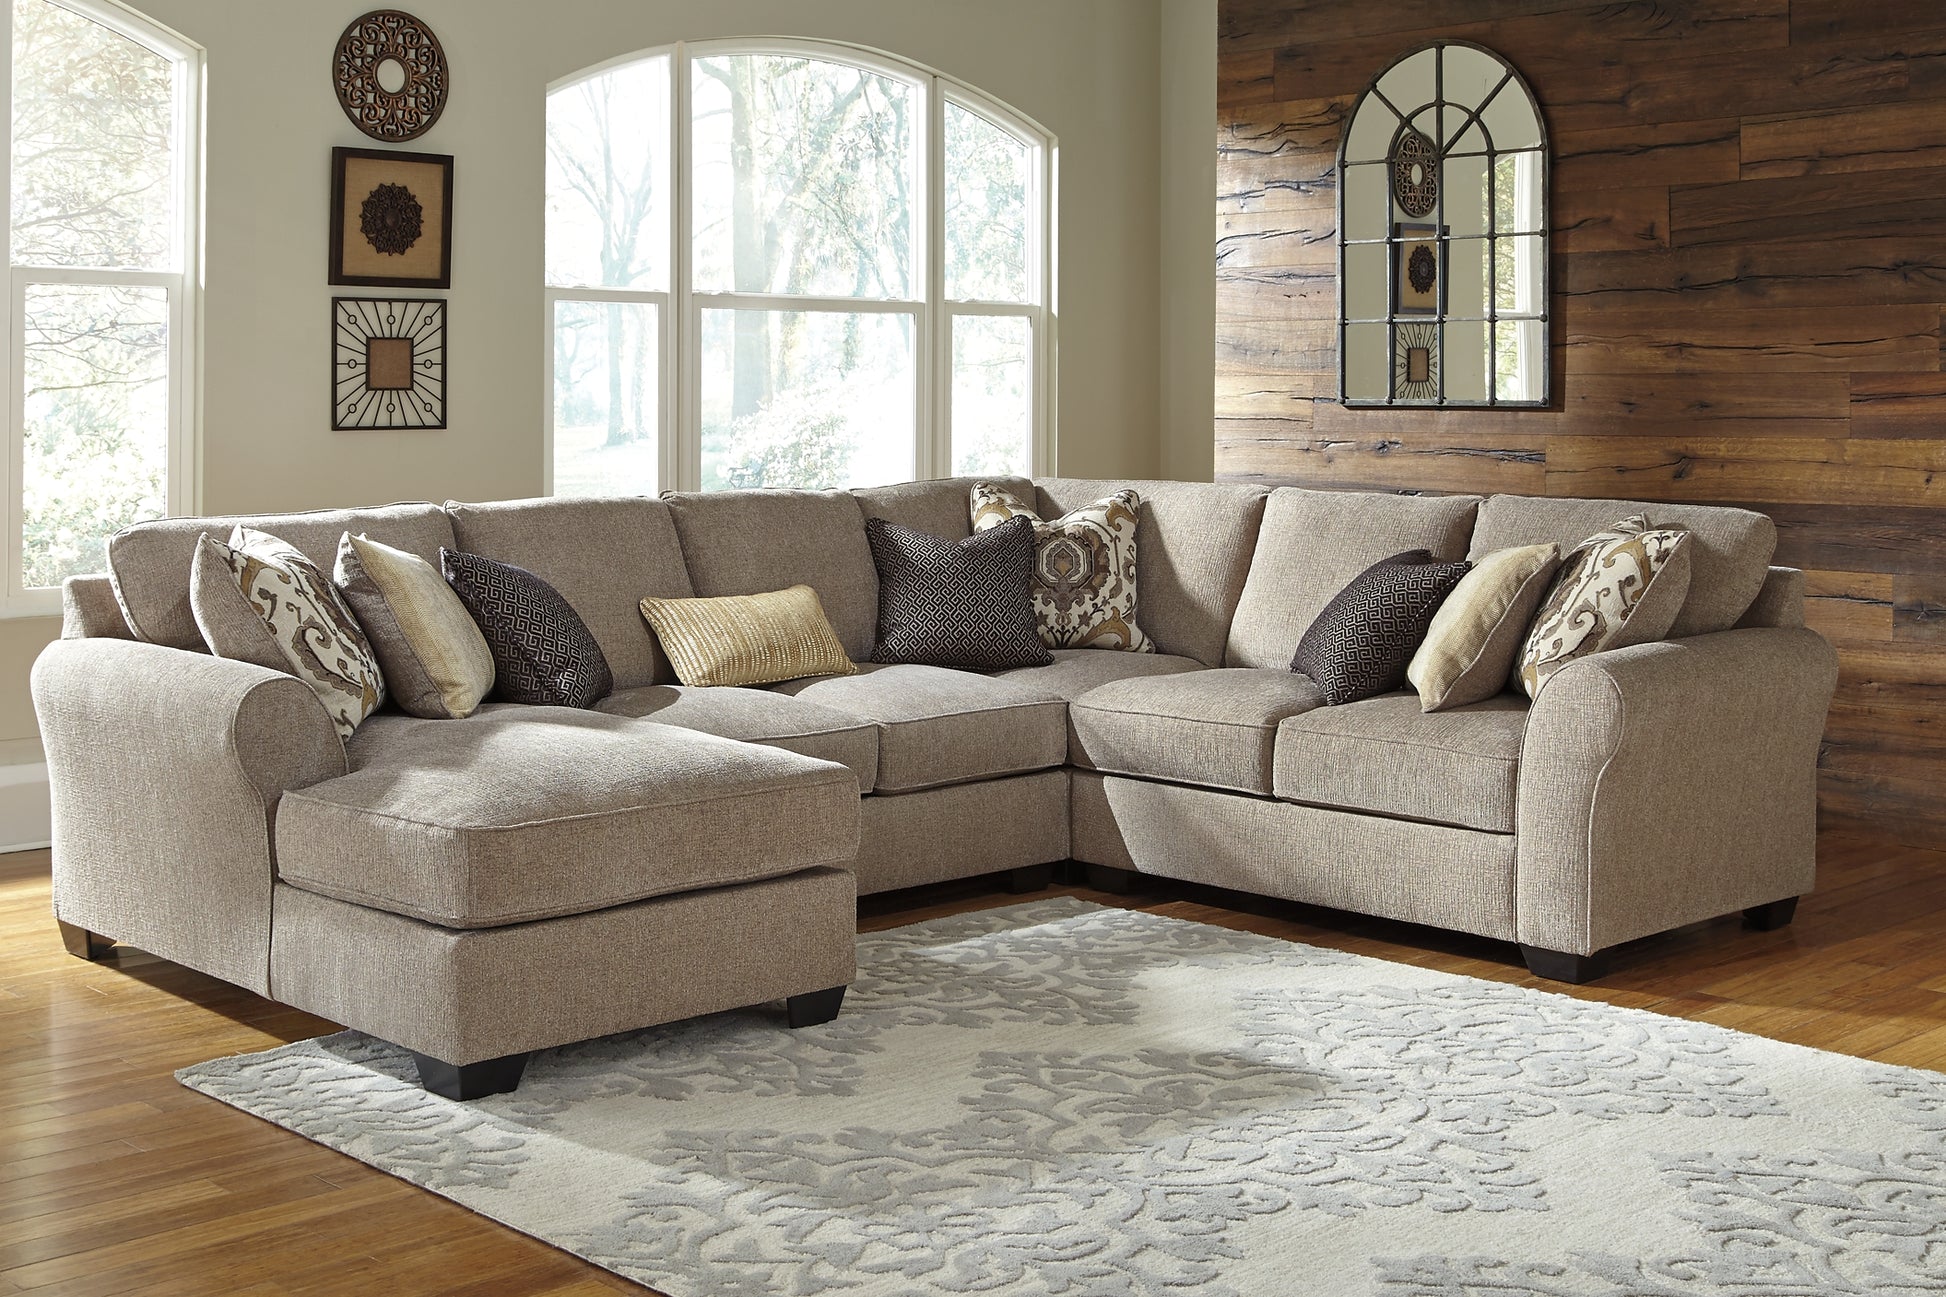 Pantomine 4-Piece Sectional with Ottoman Wilson Furniture (OH)  in Bridgeport, Ohio. Serving Bridgeport, Yorkville, Bellaire, & Avondale